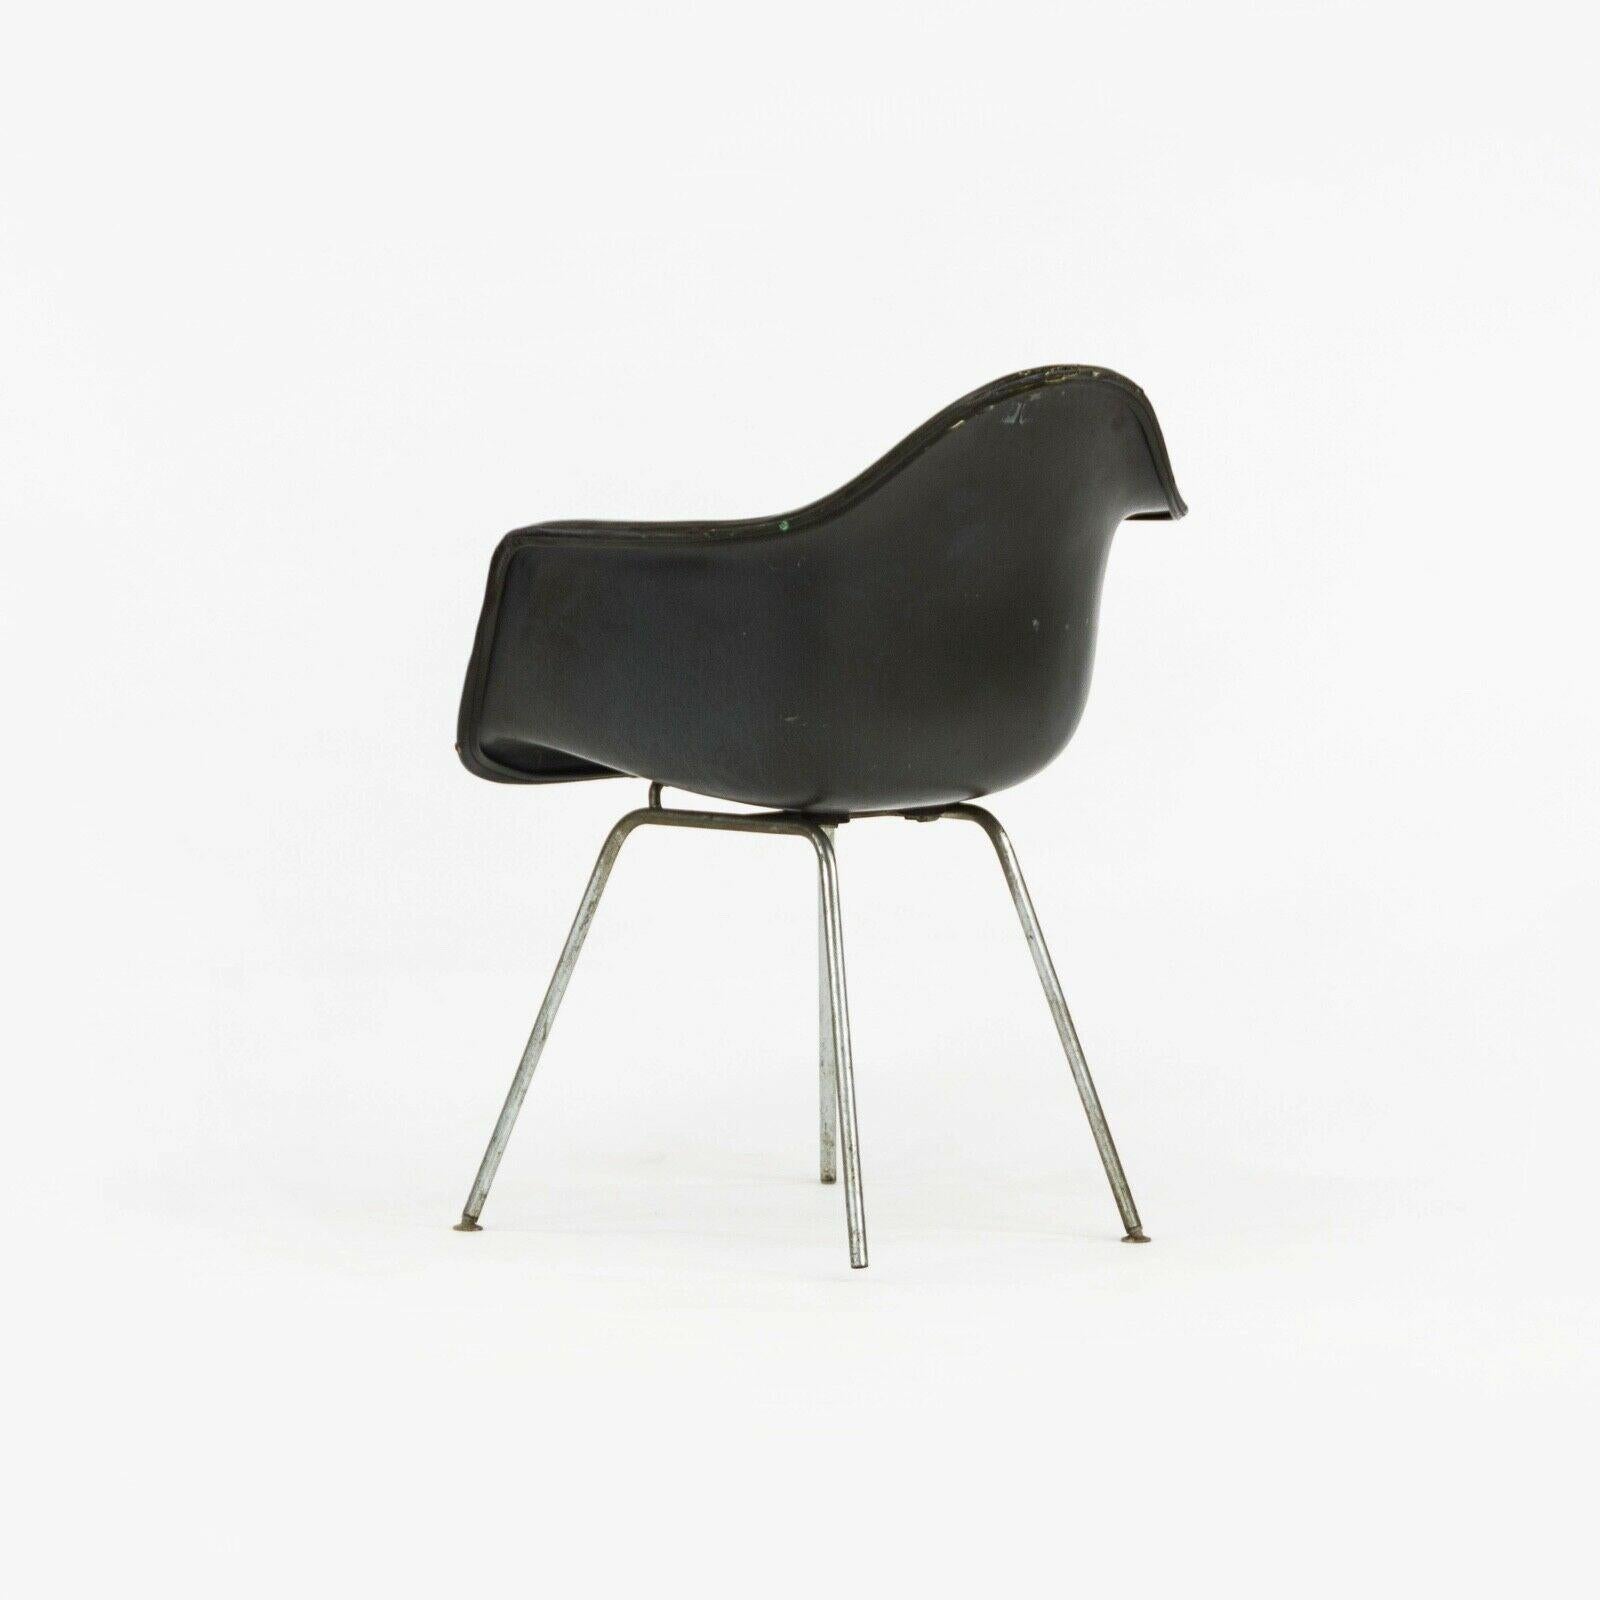 Mid-20th Century 1959 Herman Miller Eames DAX Fiberglass Arm Shell Chair with Green Removable Pad For Sale